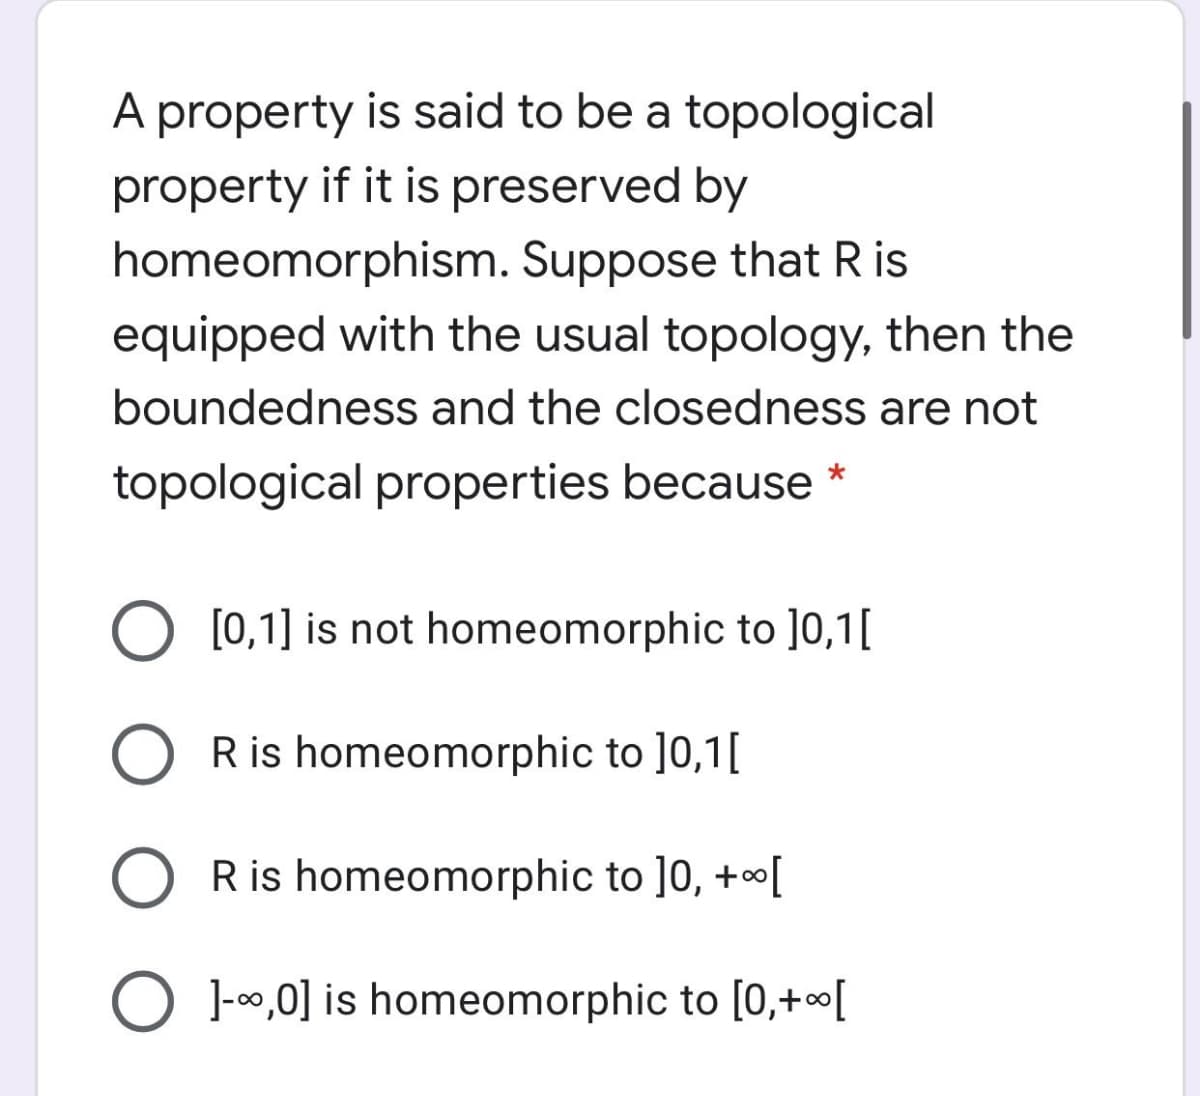 A property is said to be a topological
property if it is preserved by
homeomorphism. Suppose that R is
equipped with the usual topology, then the
boundedness and the closedness are not
topological properties because *
O [0,1] is not homeomorphic to ]0,1[
R is homeomorphic to ]0,1[
R is homeomorphic to ]0, +[
O 1-0,0] is homeomorphic to [0,+«[
